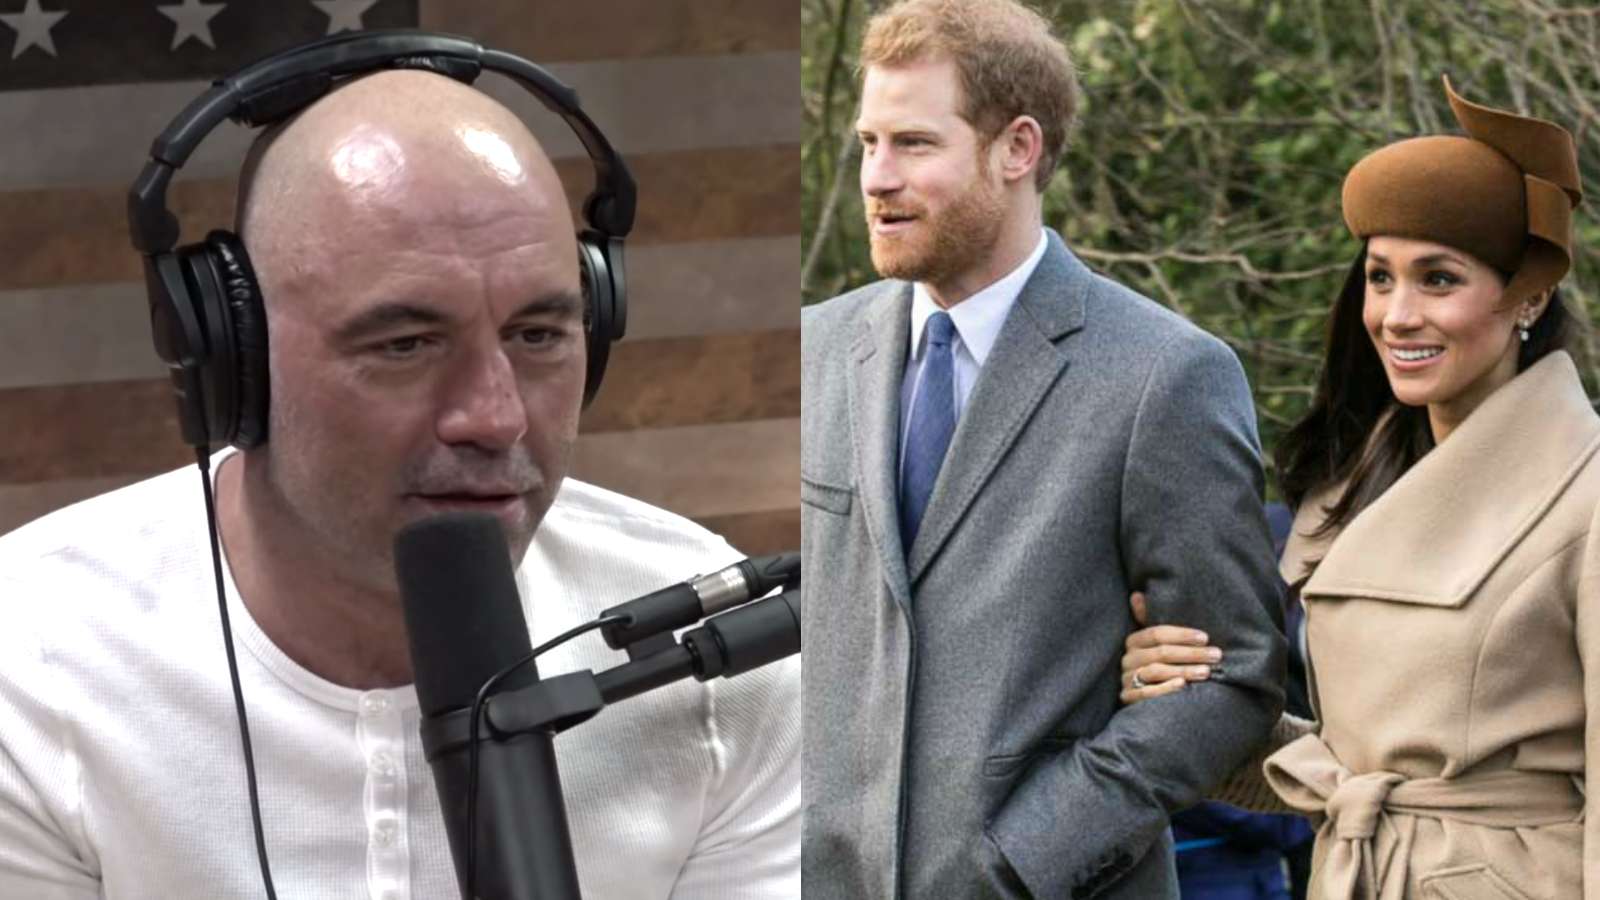 Joe Rogan on YouTube podcast discussing Prince Harry and Meghan Markle leaving Royal Family